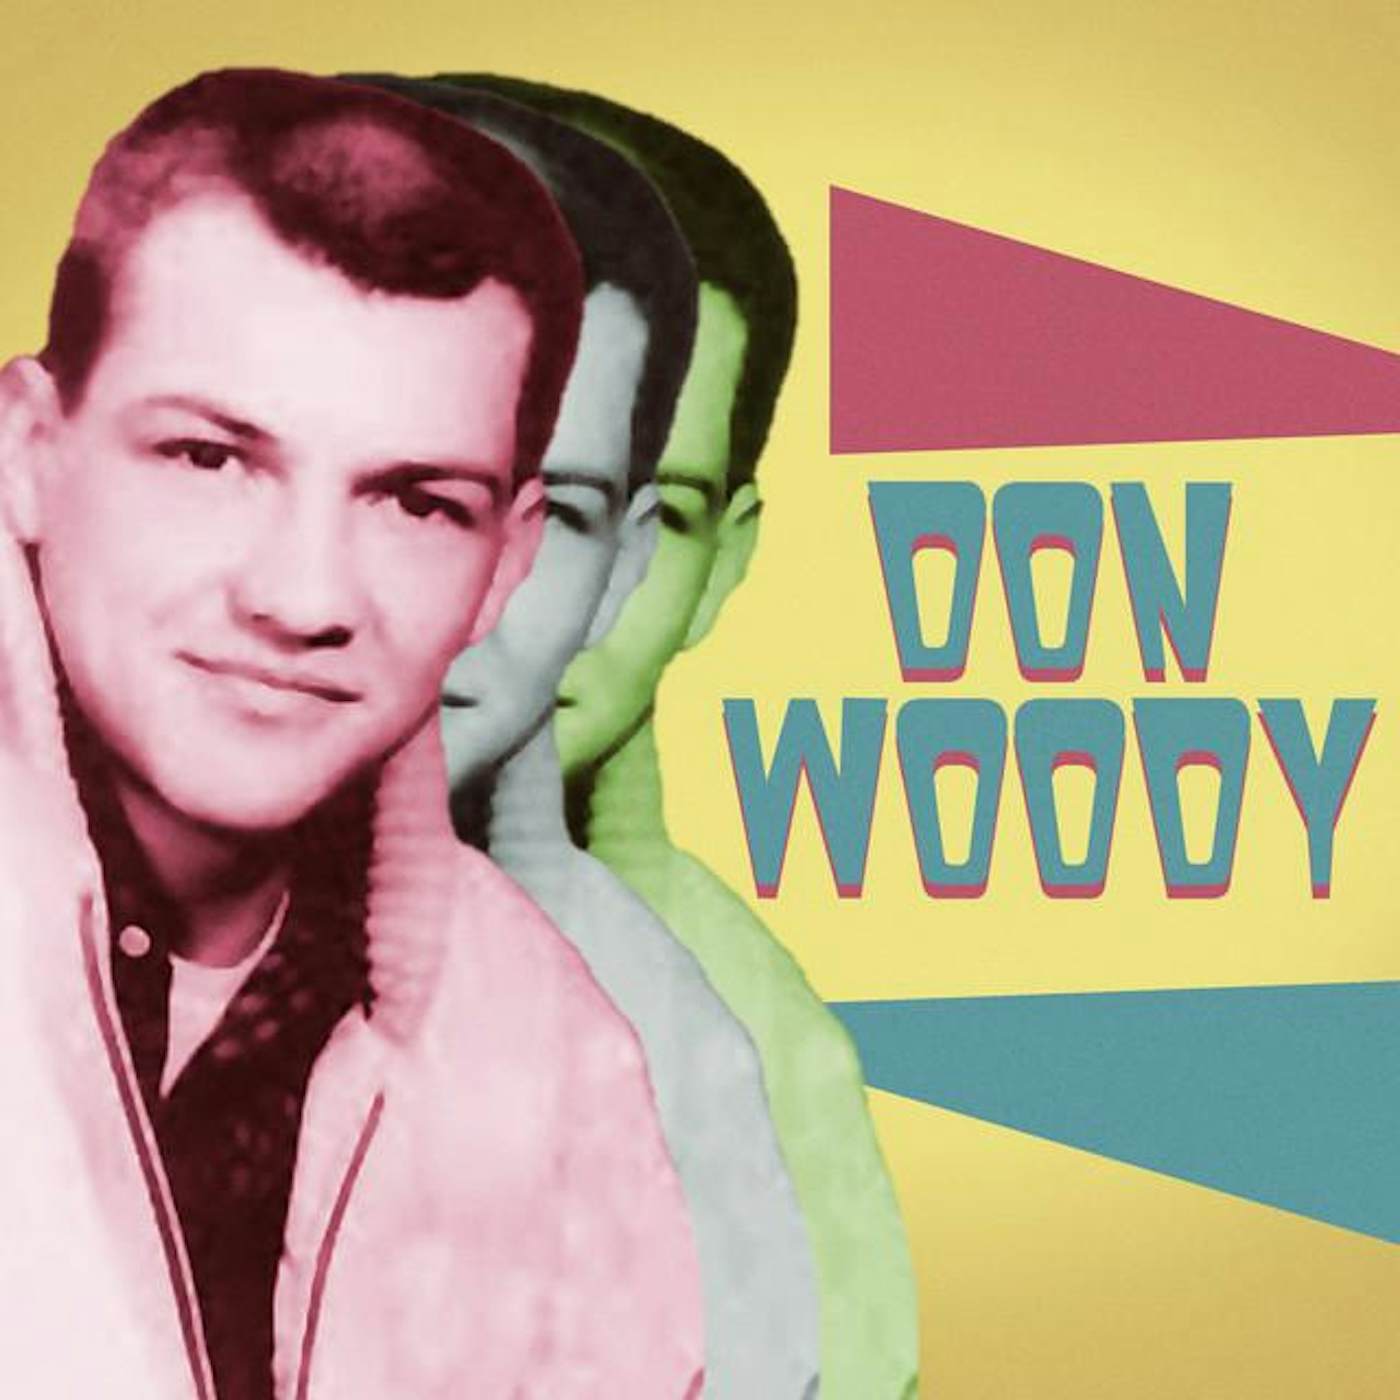 Don Woody